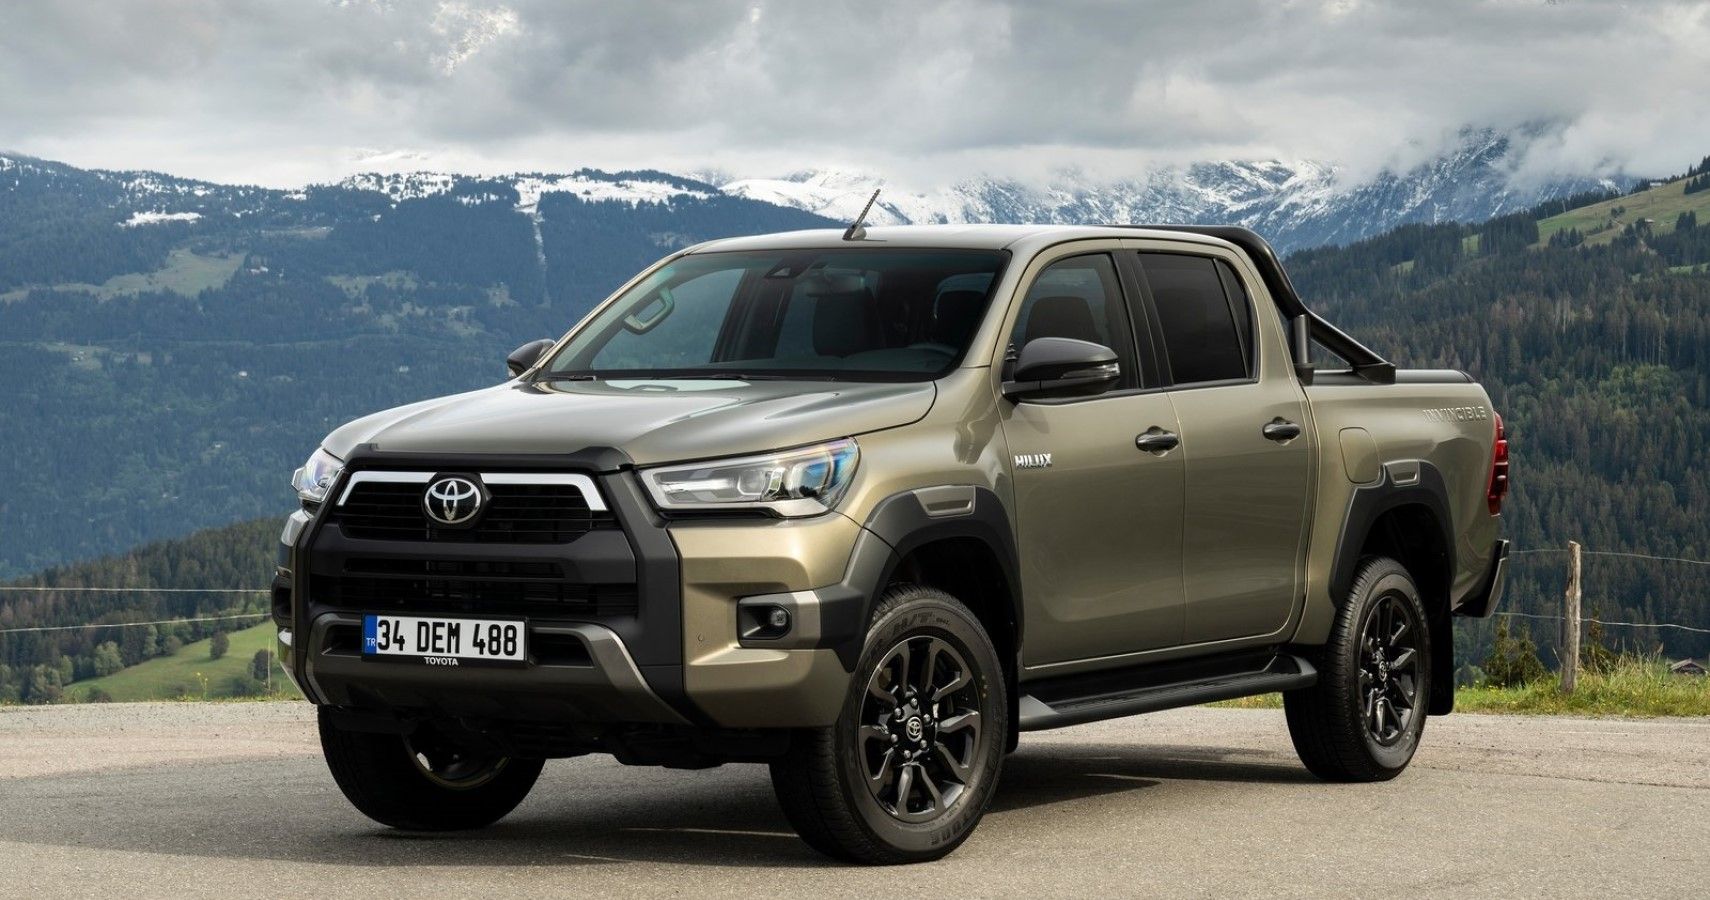 roddel Diagnostiseren adopteren The Real Reason Why Toyota Hilux Is Banned In The US